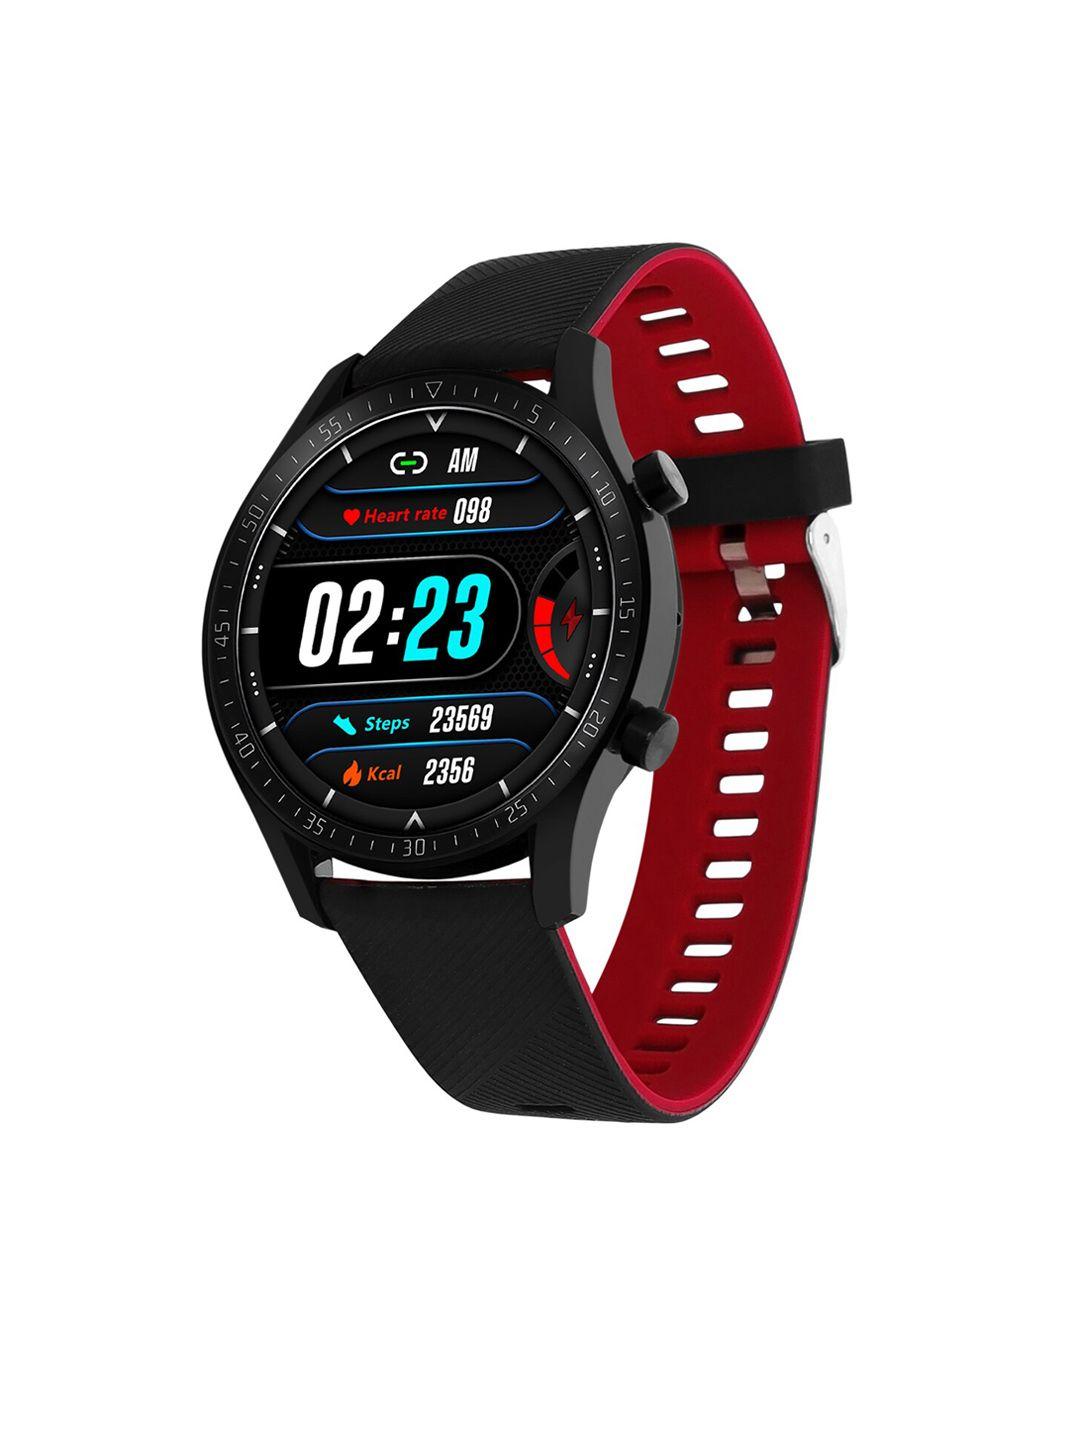 giordano-black-&-red-solid-smart-watch-with-additional-straps-r2-zm08-02